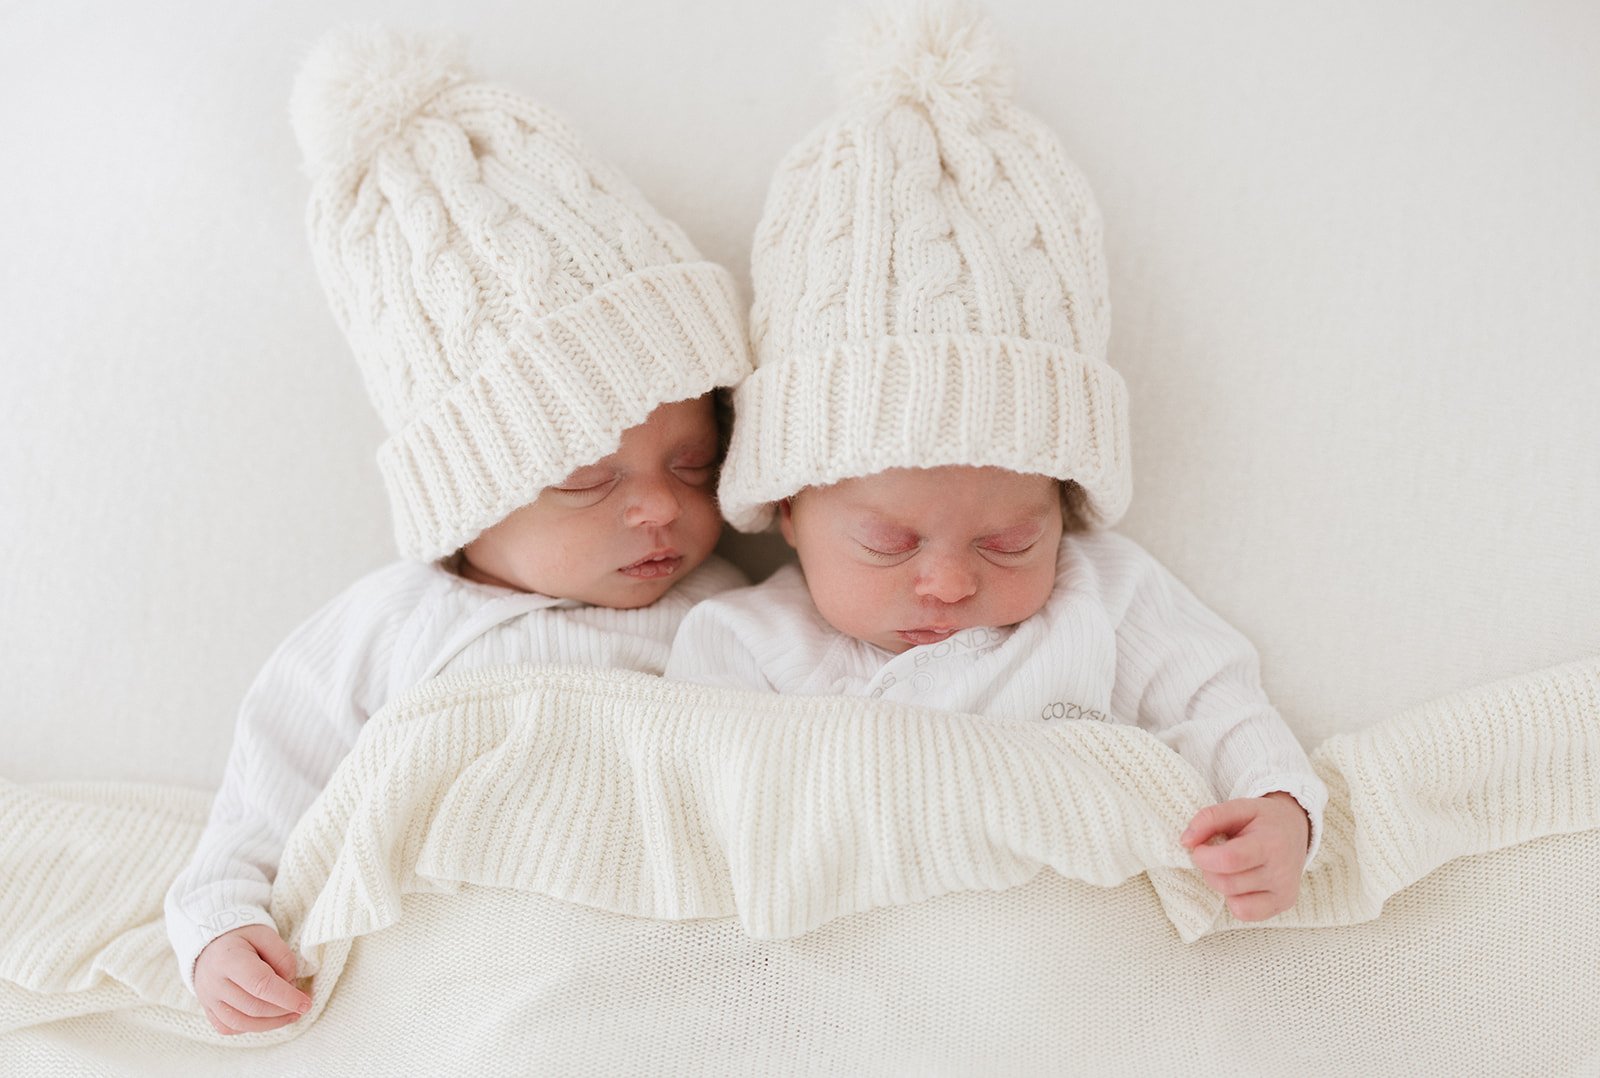  newborn baby twins photographed in white knit beanies cuddled in a white frill blanket  